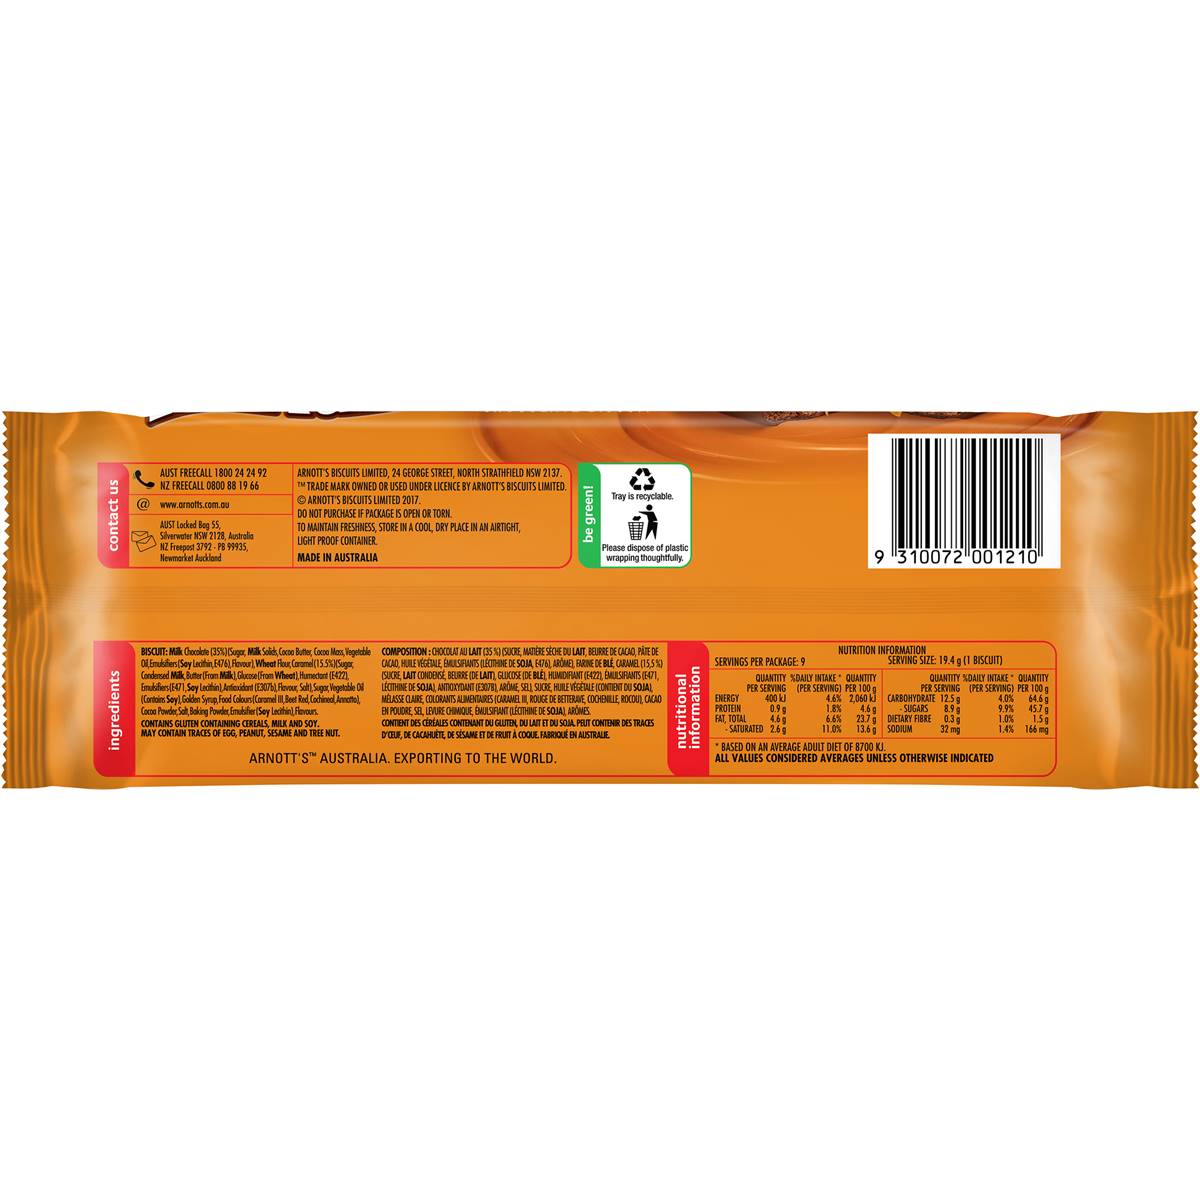 Arnott's Tim Tam Chocolate Biscuits, 175 Grams/6.2 Ounces, Chewy Caramel - image 3 of 6